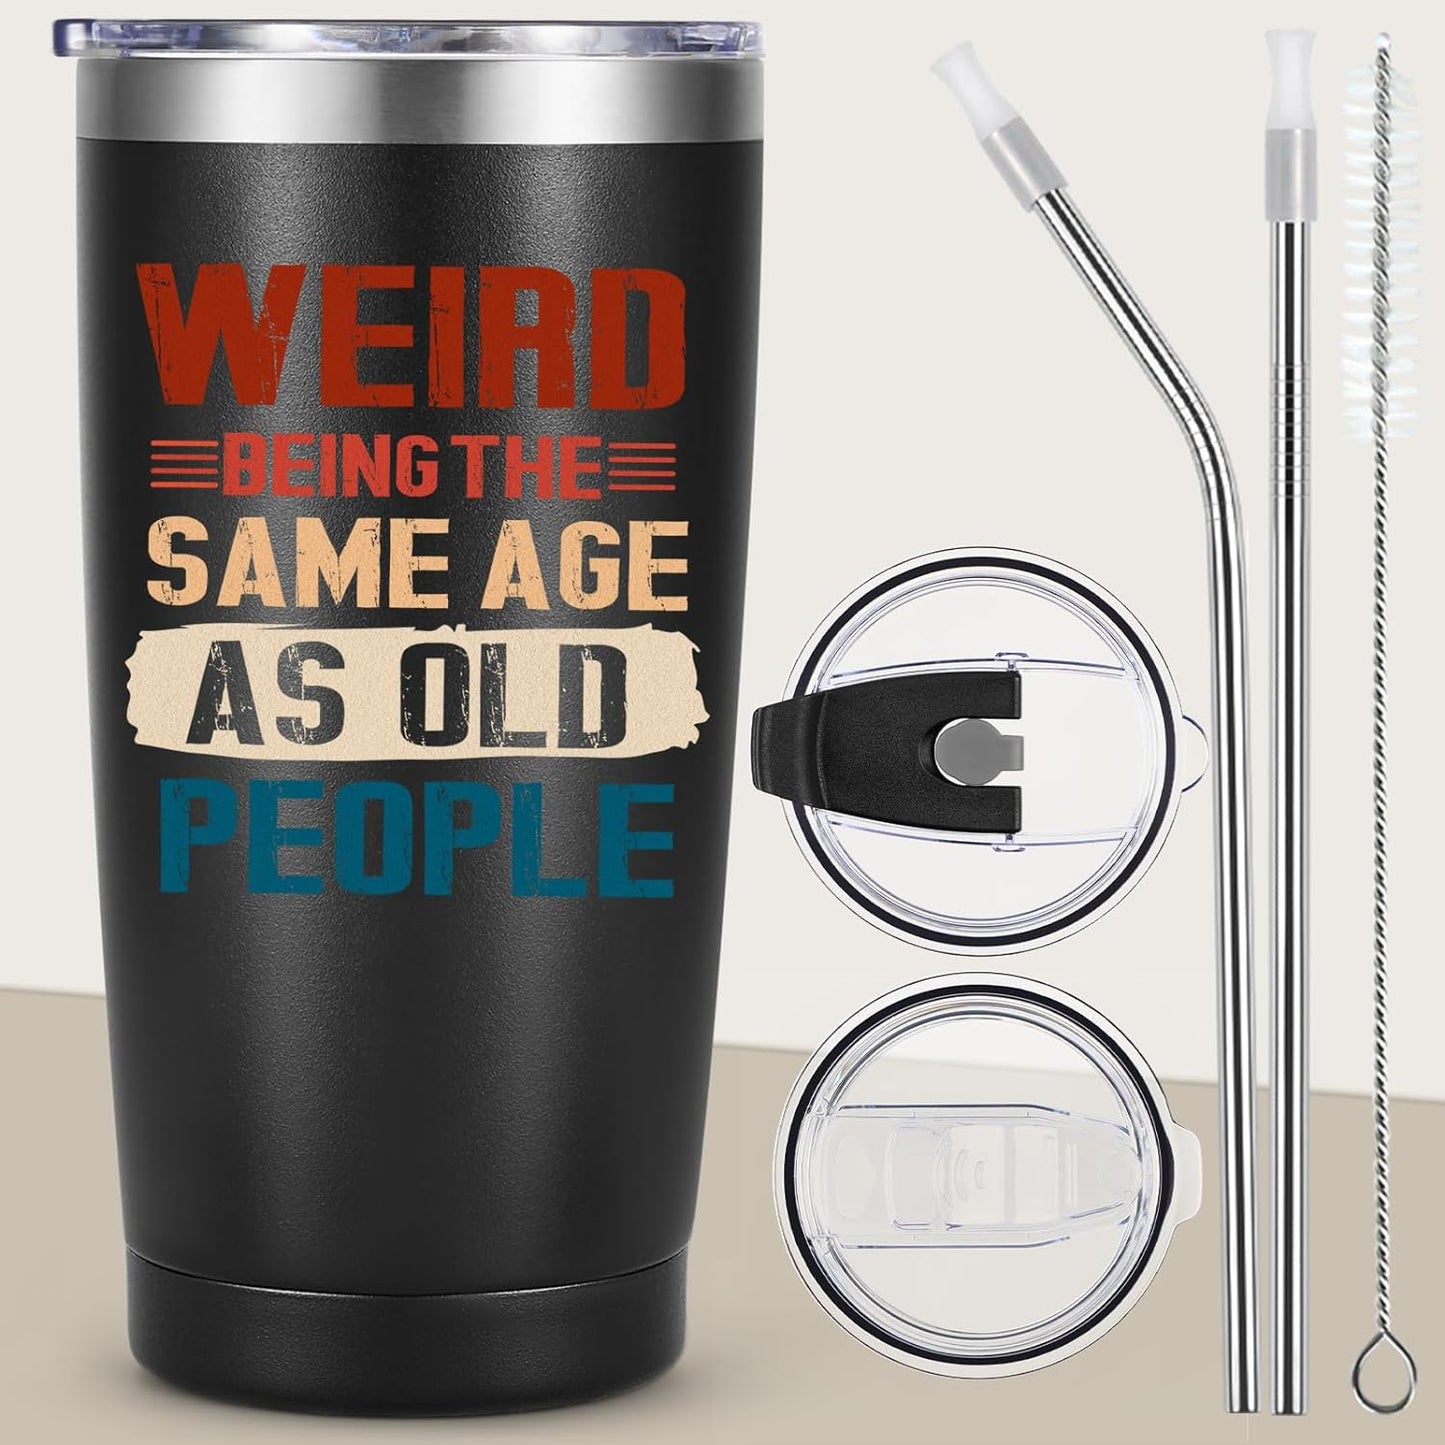 Birthday Gifts for Men 30th 40th 50th 60th 70th 80th, Funny Cool Weird Old People 20oz Tumbler, Unique Gag Birthday Gifts Ideas for Dad Husband Friend Grandpa Him